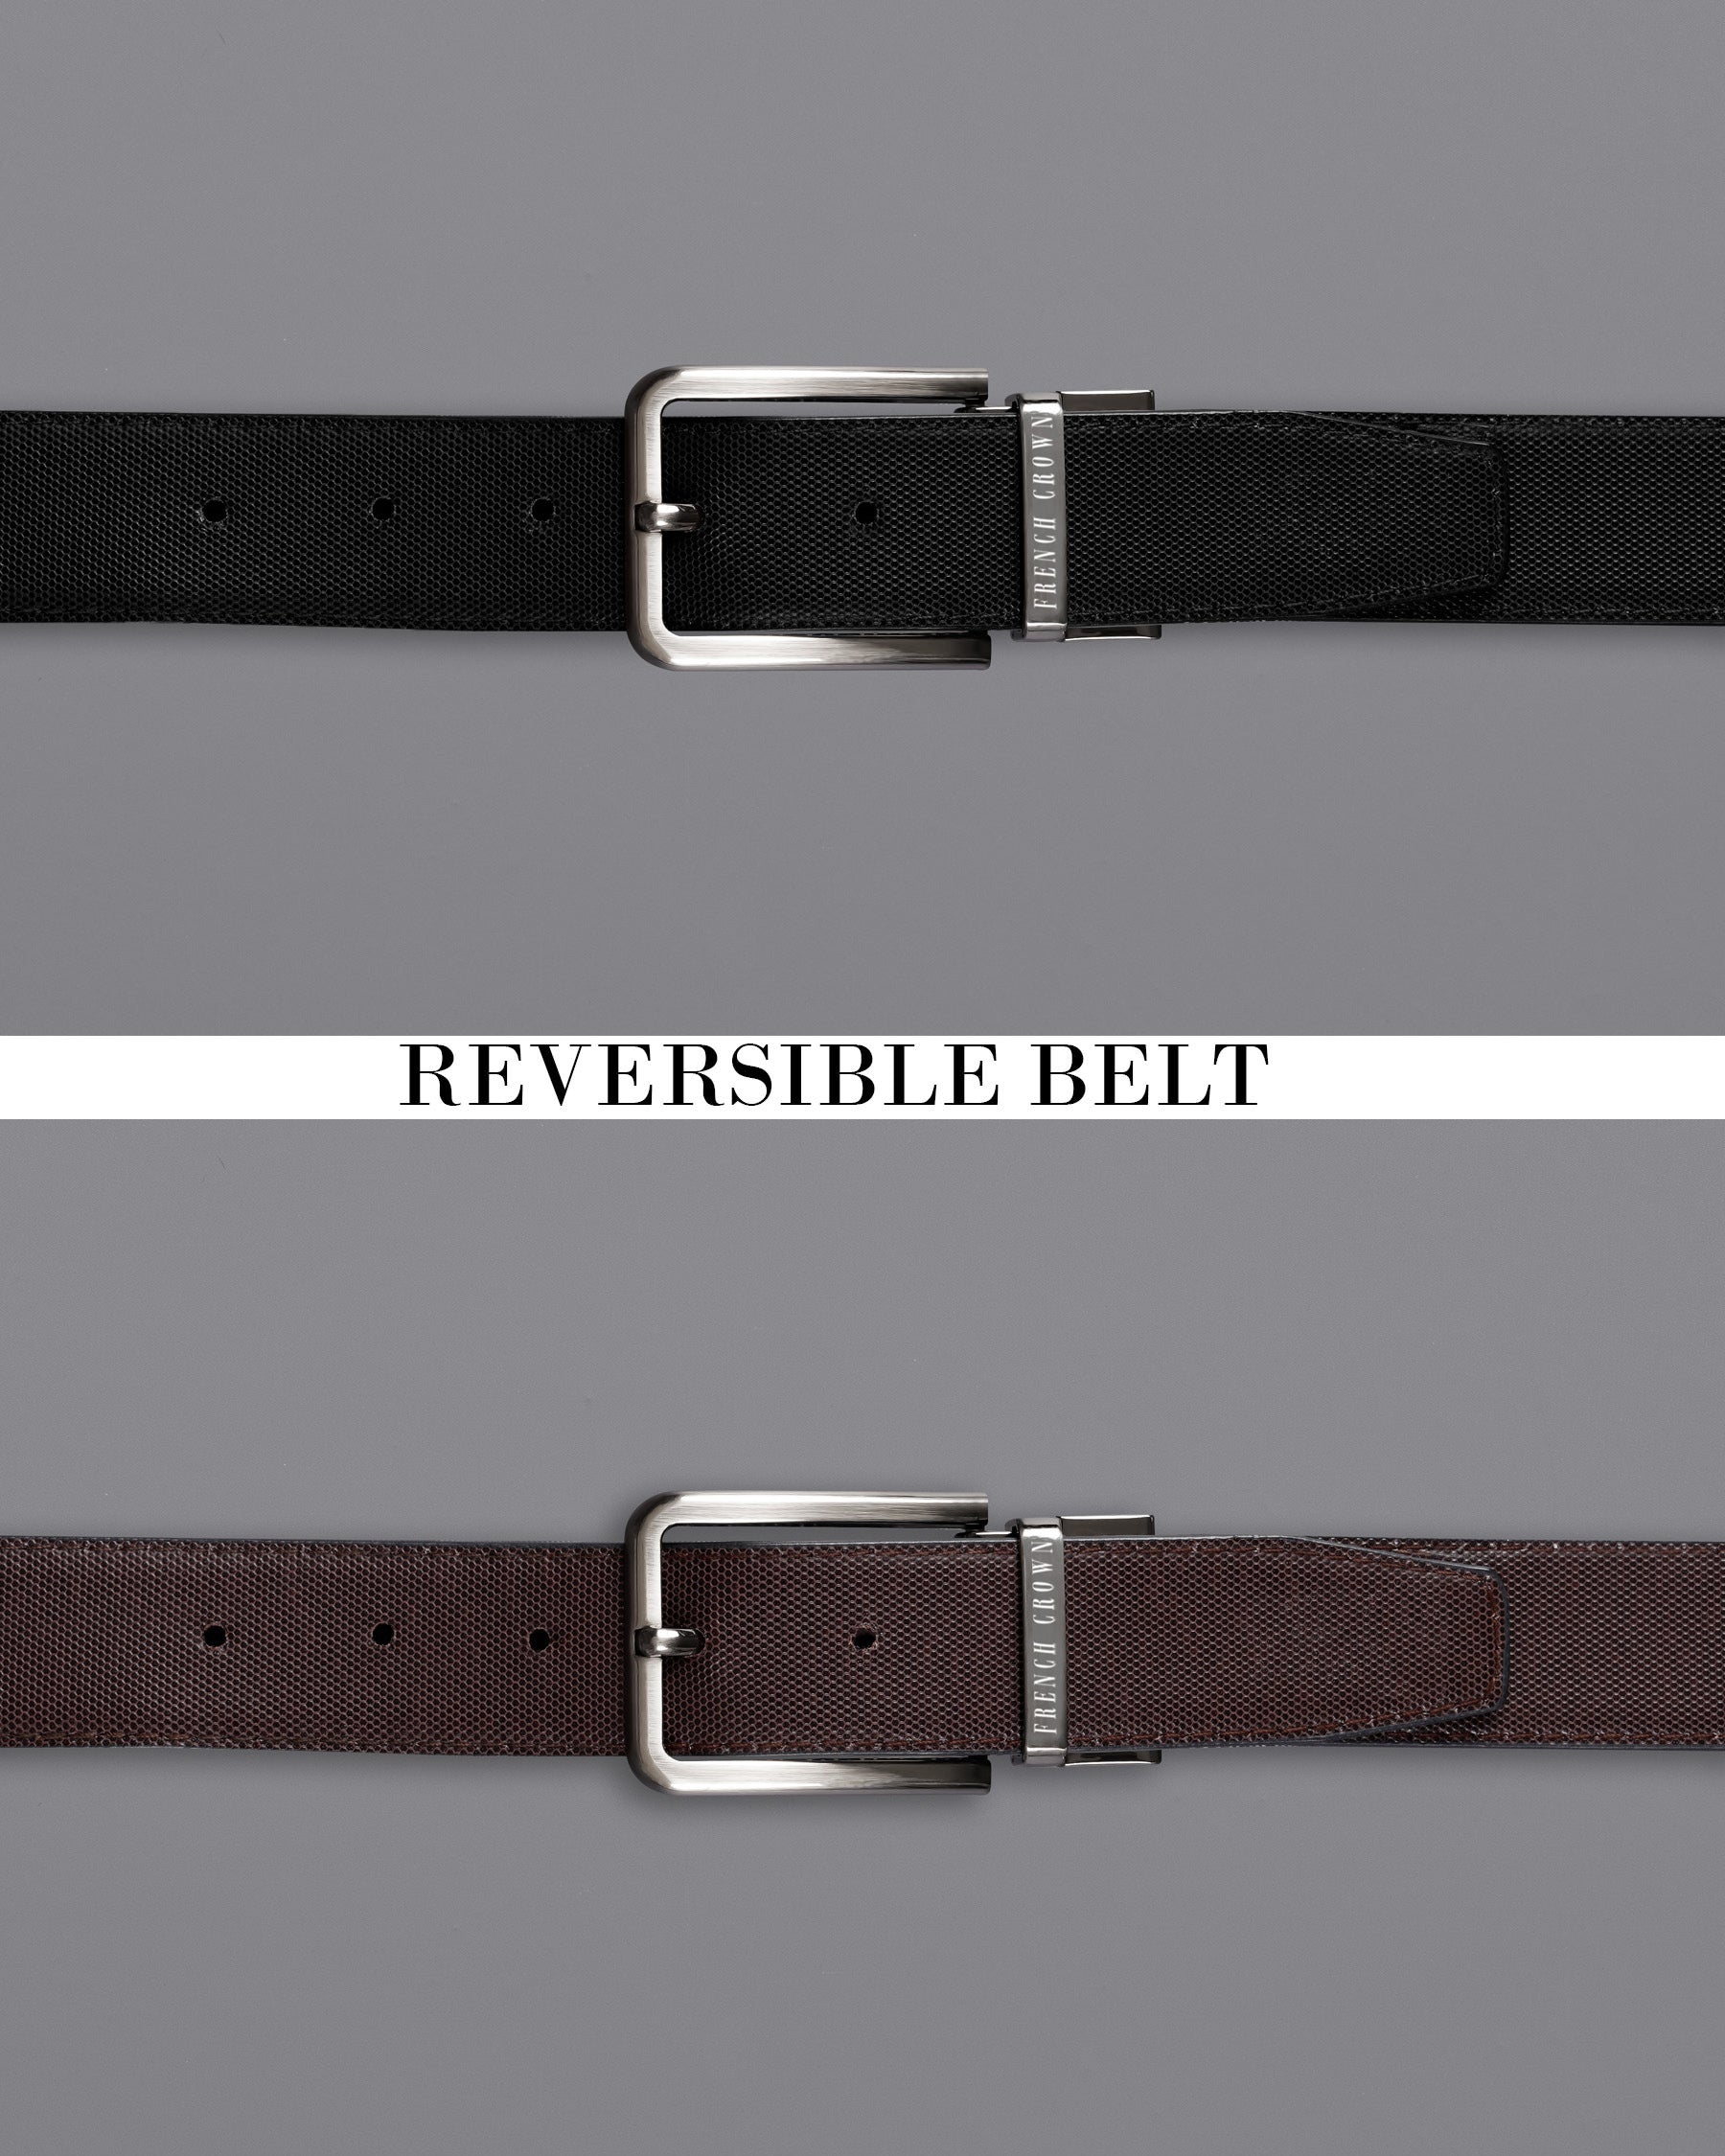 Silver Metallic Shiny Buckle with Jade Black and Brown Leather Free Handcrafted Reversible Belt BT078-28, BT078-30, BT078-32, BT078-34, BT078-36, BT078-38